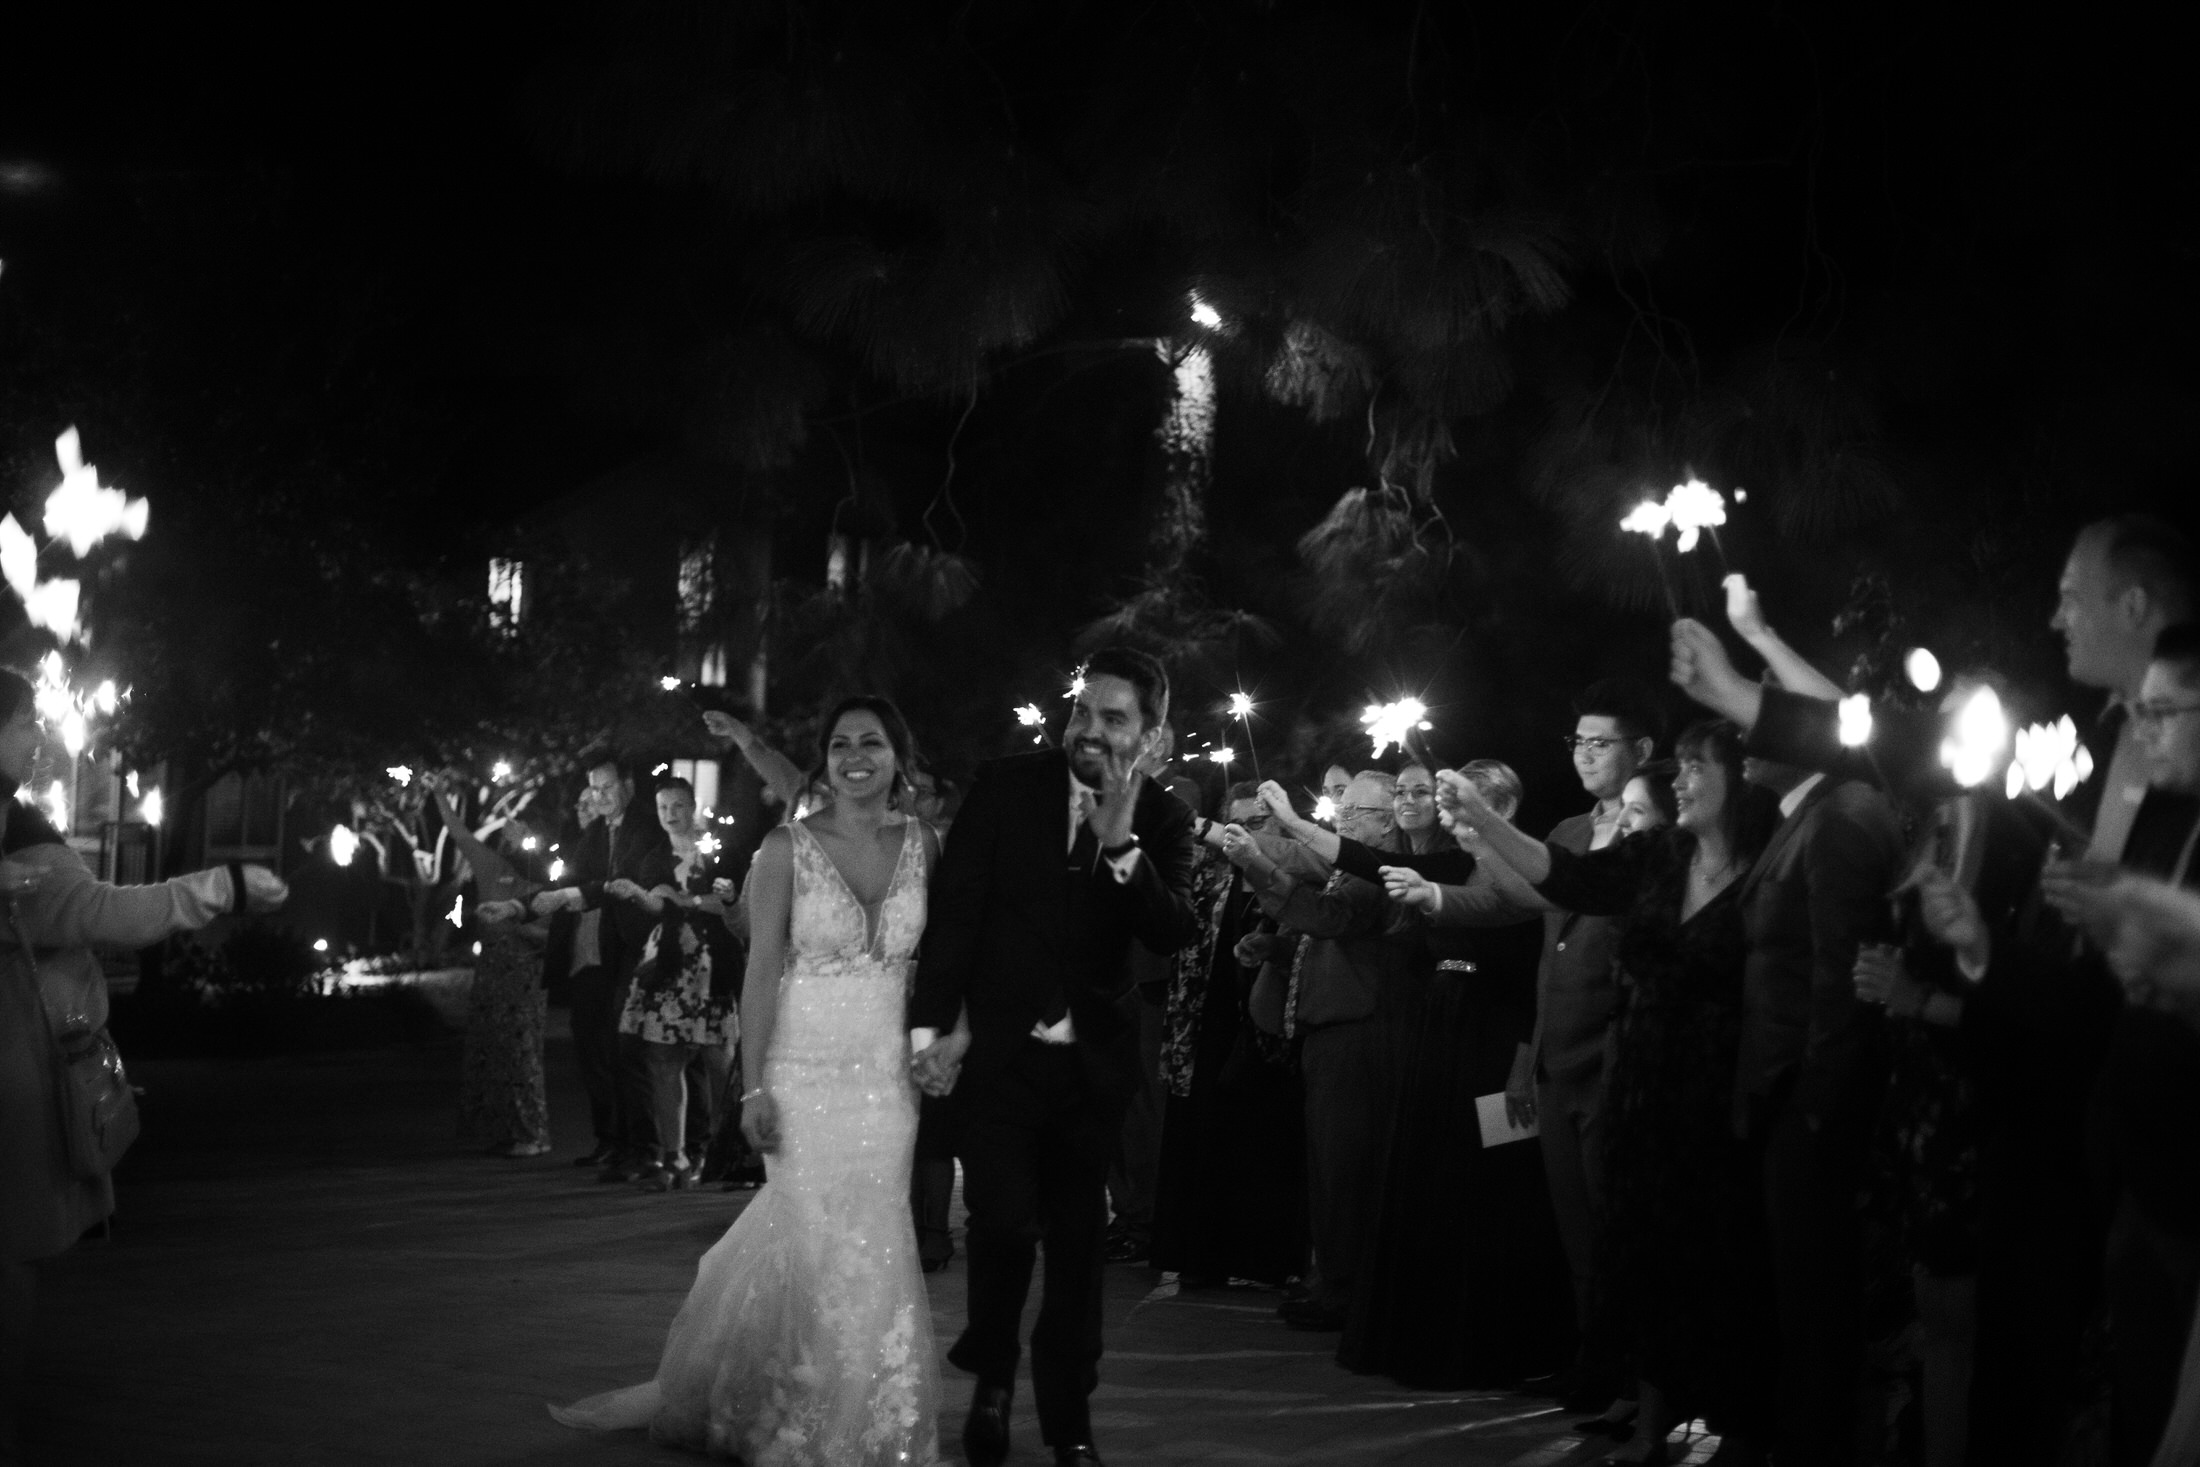 A sparkler send for the bride and groom.